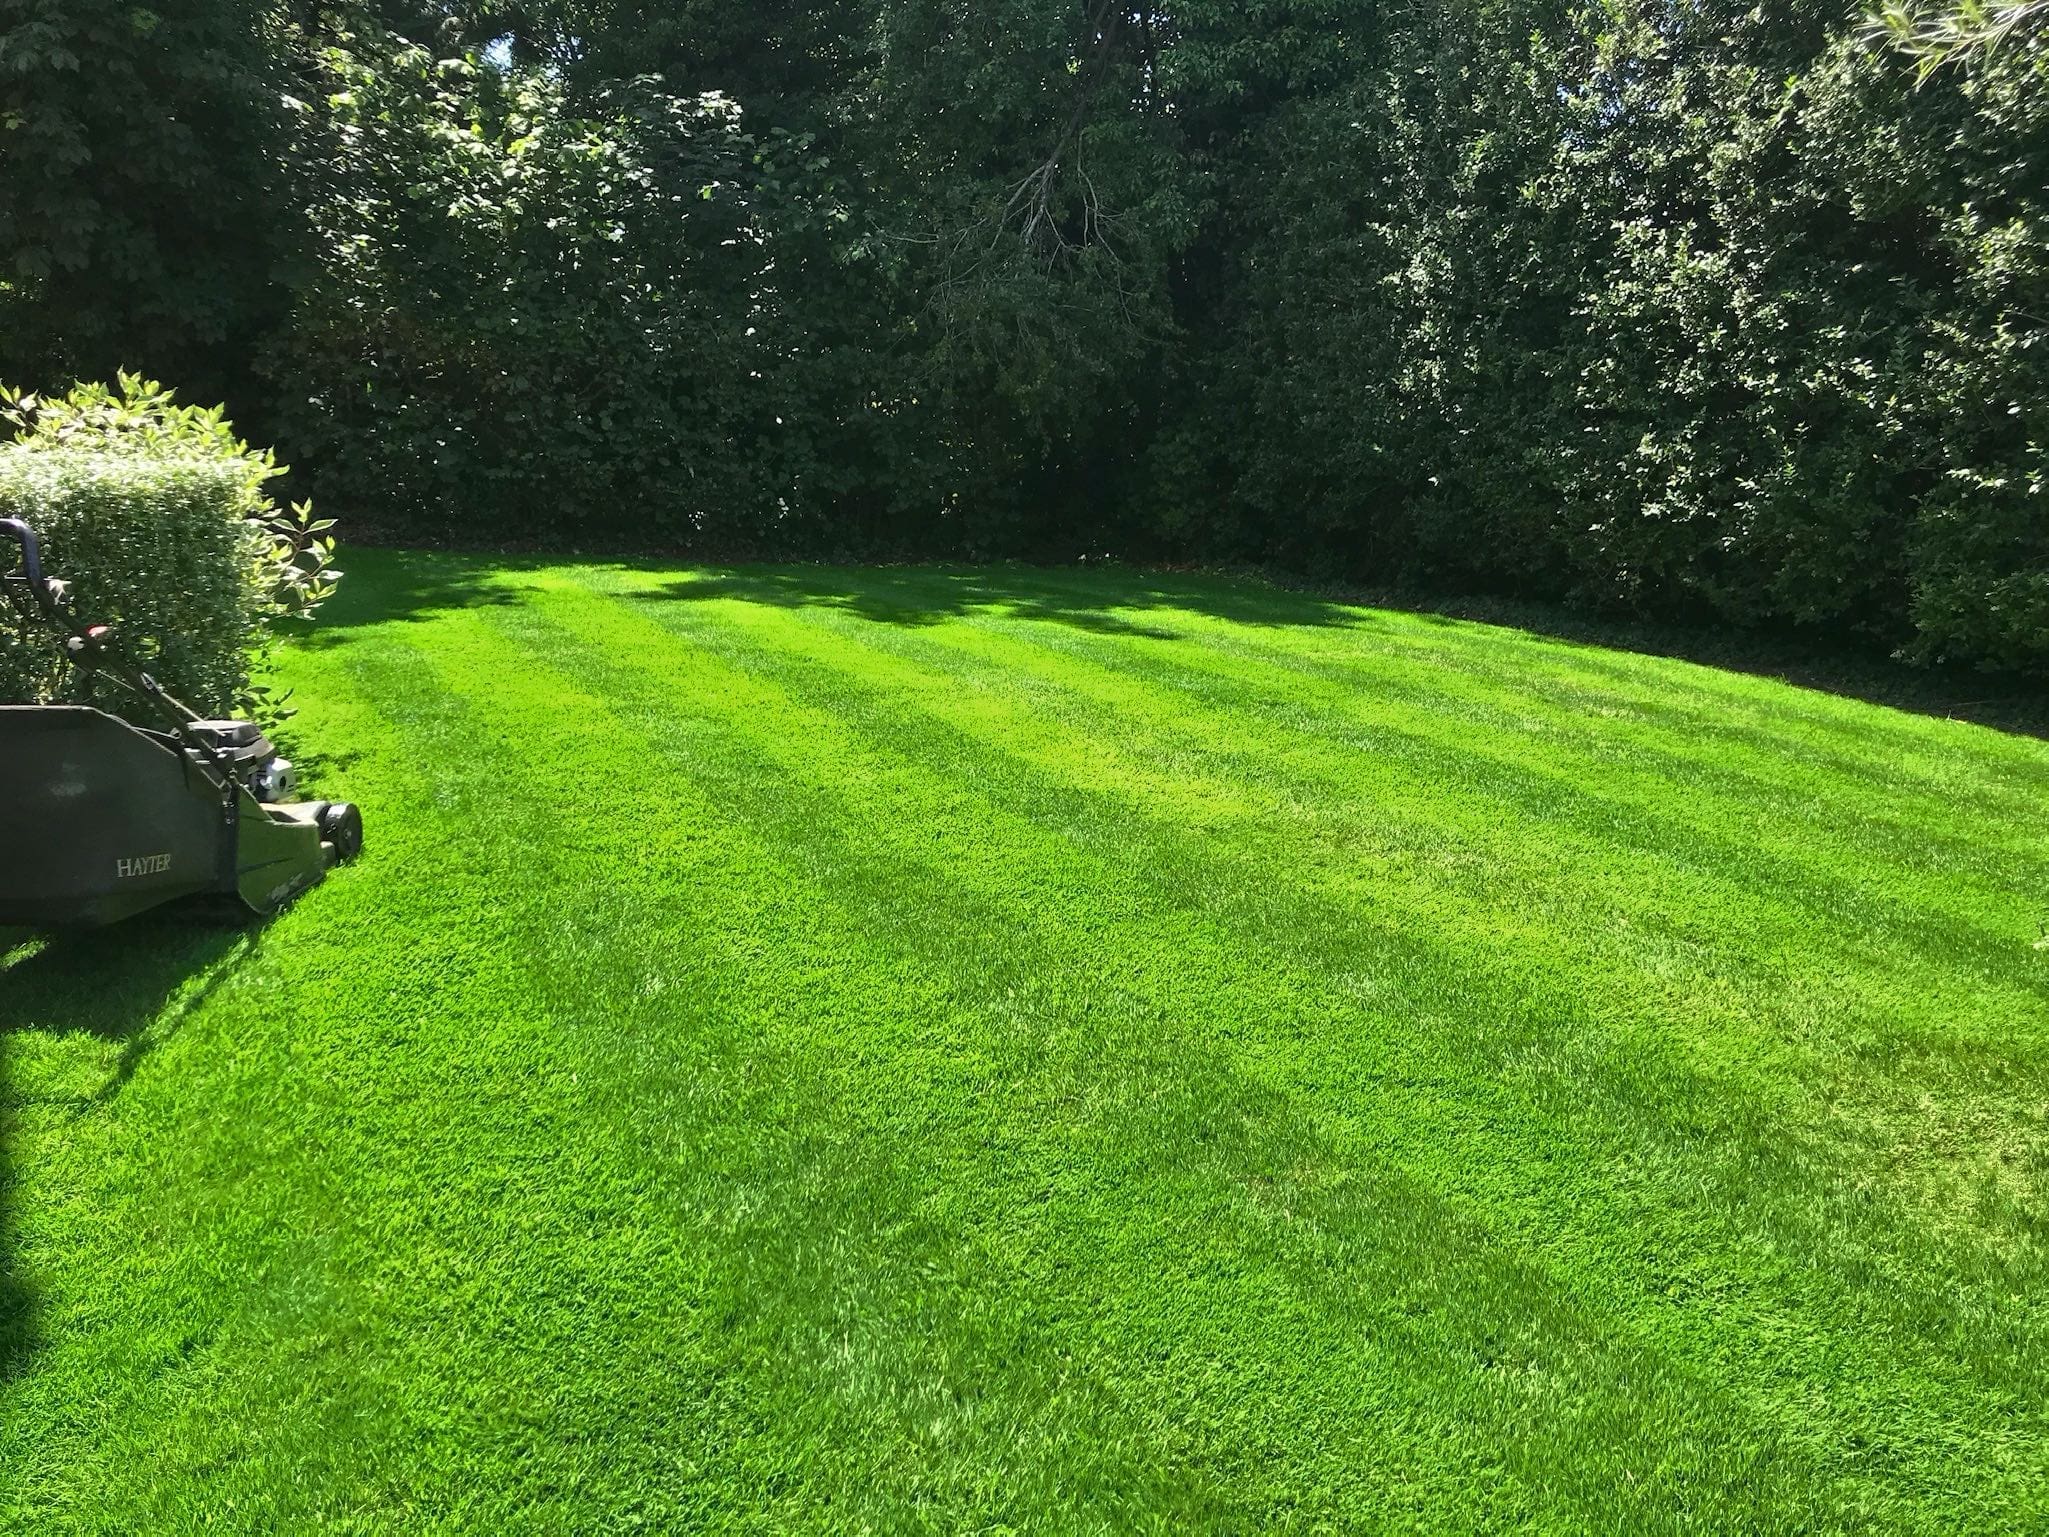 Bright green healthy lawn with stripes